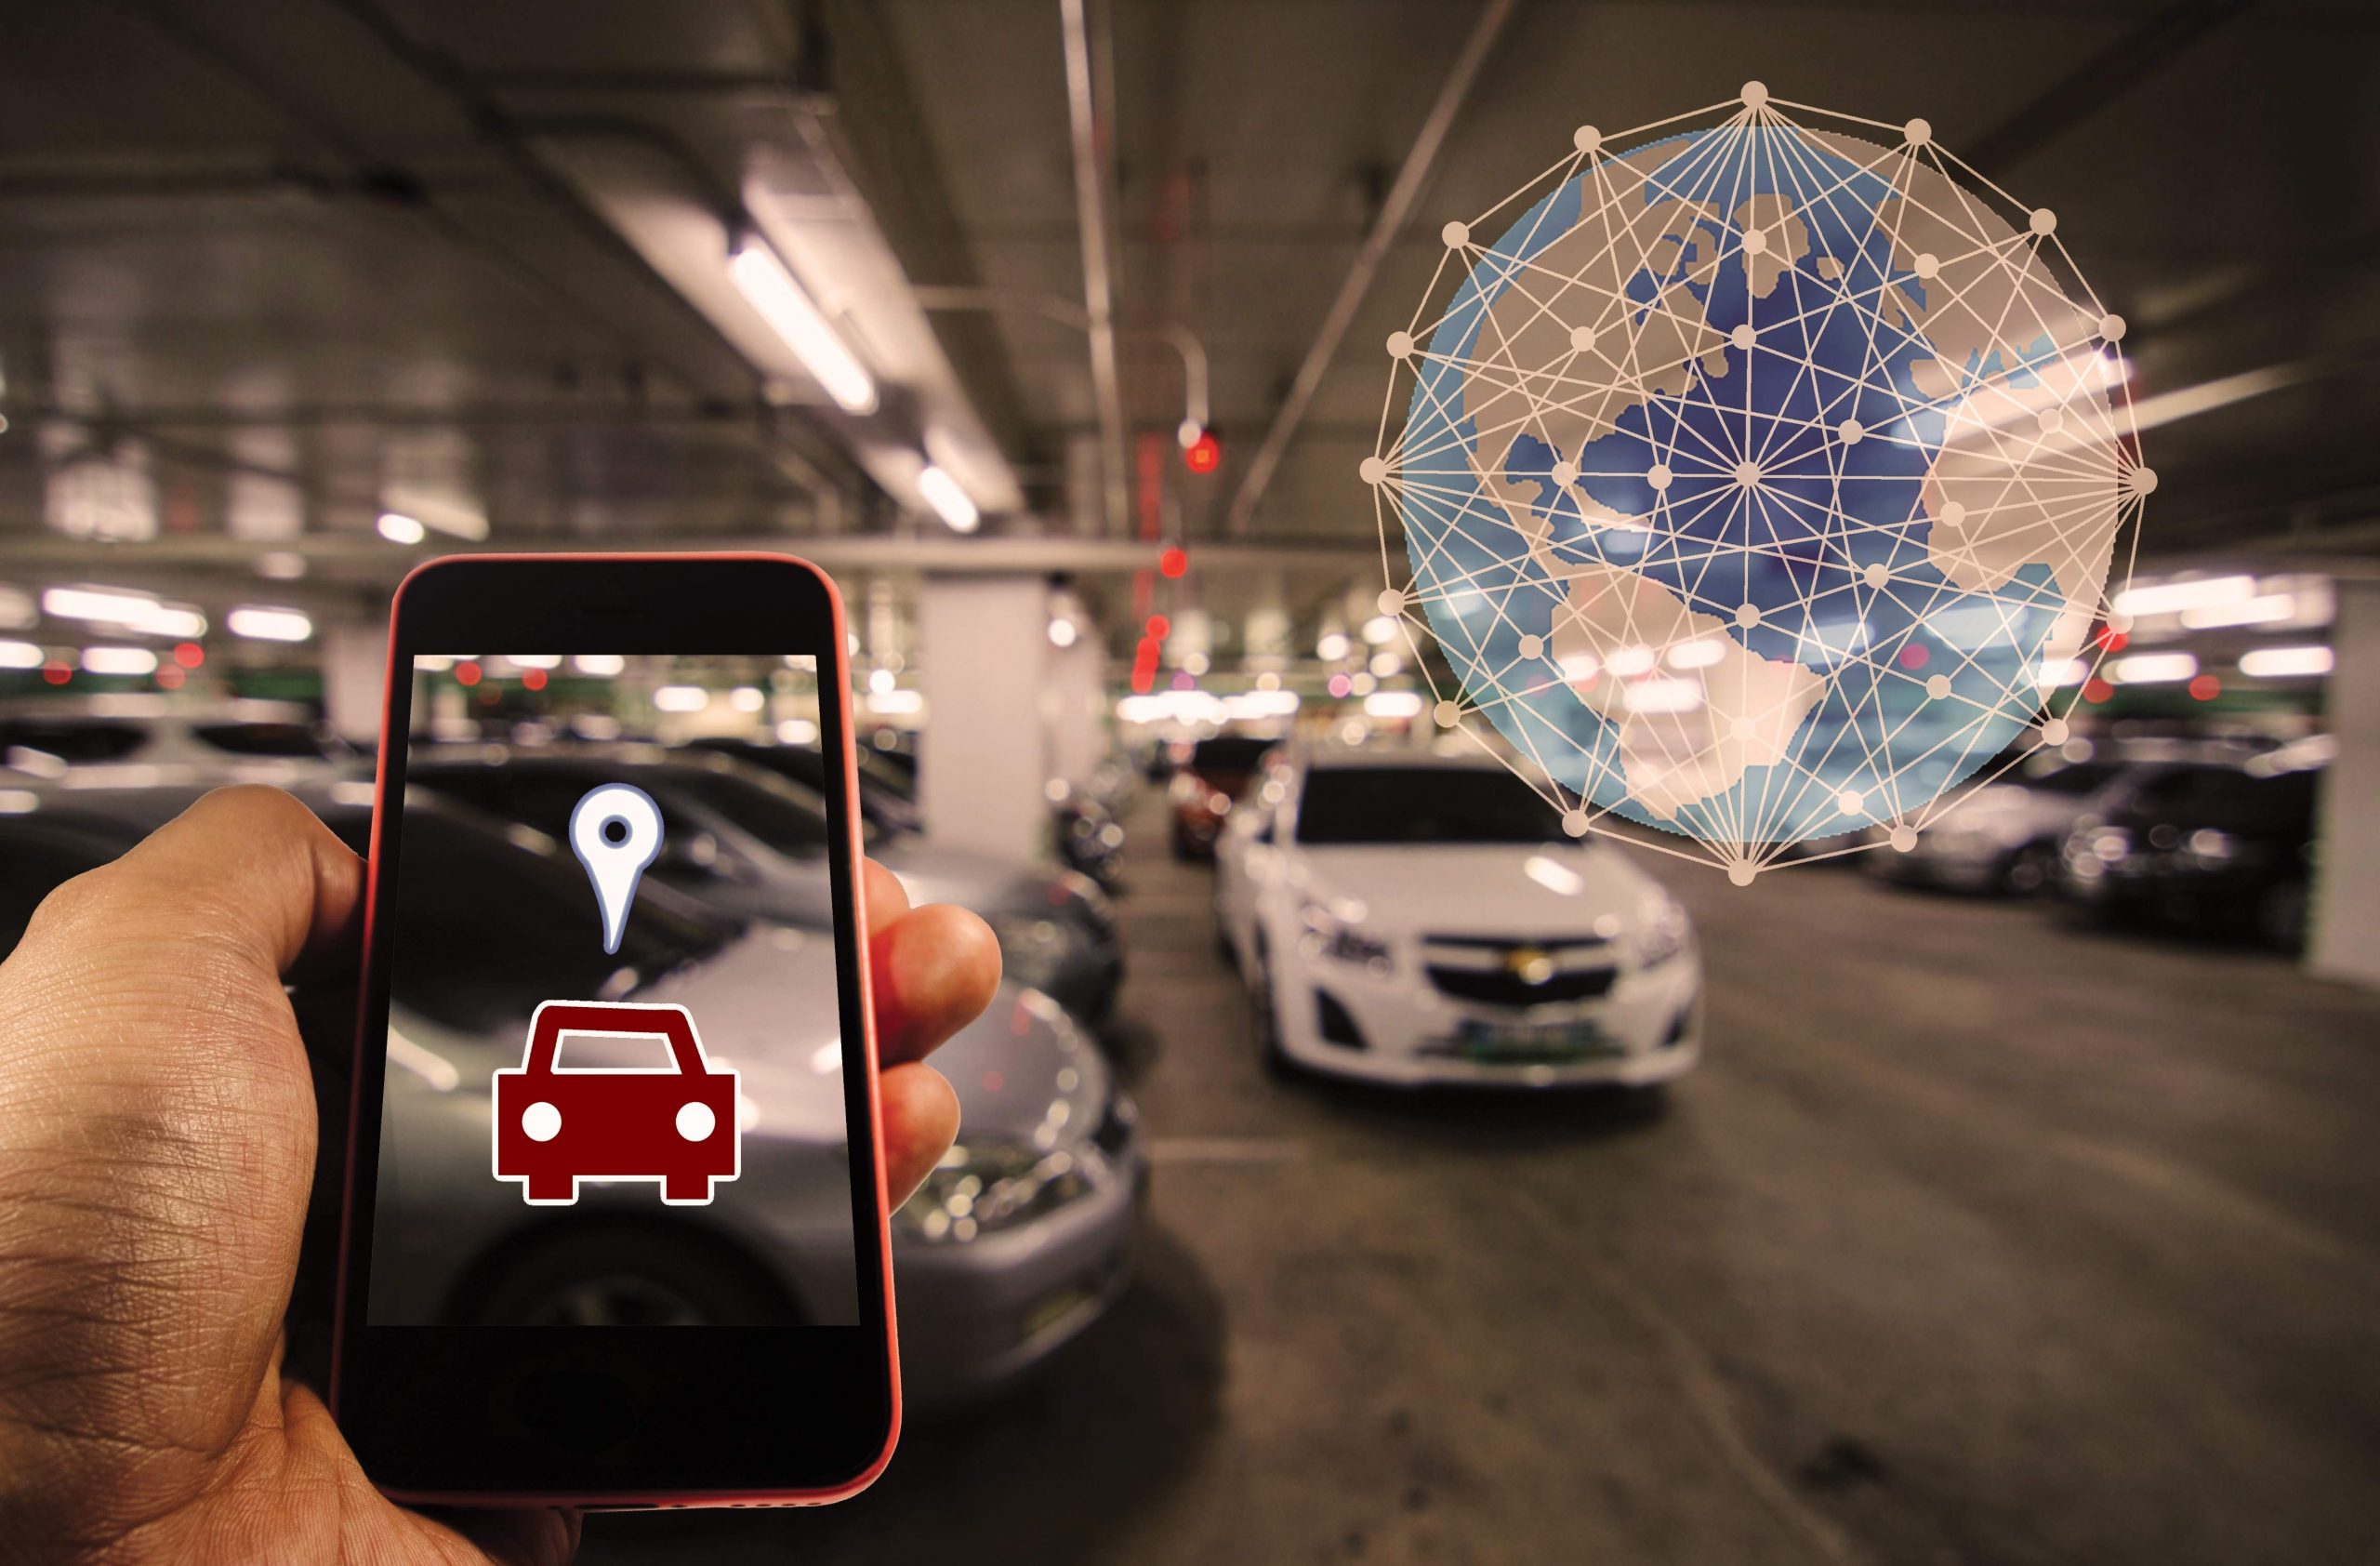 Smart Parking Systems using IoT